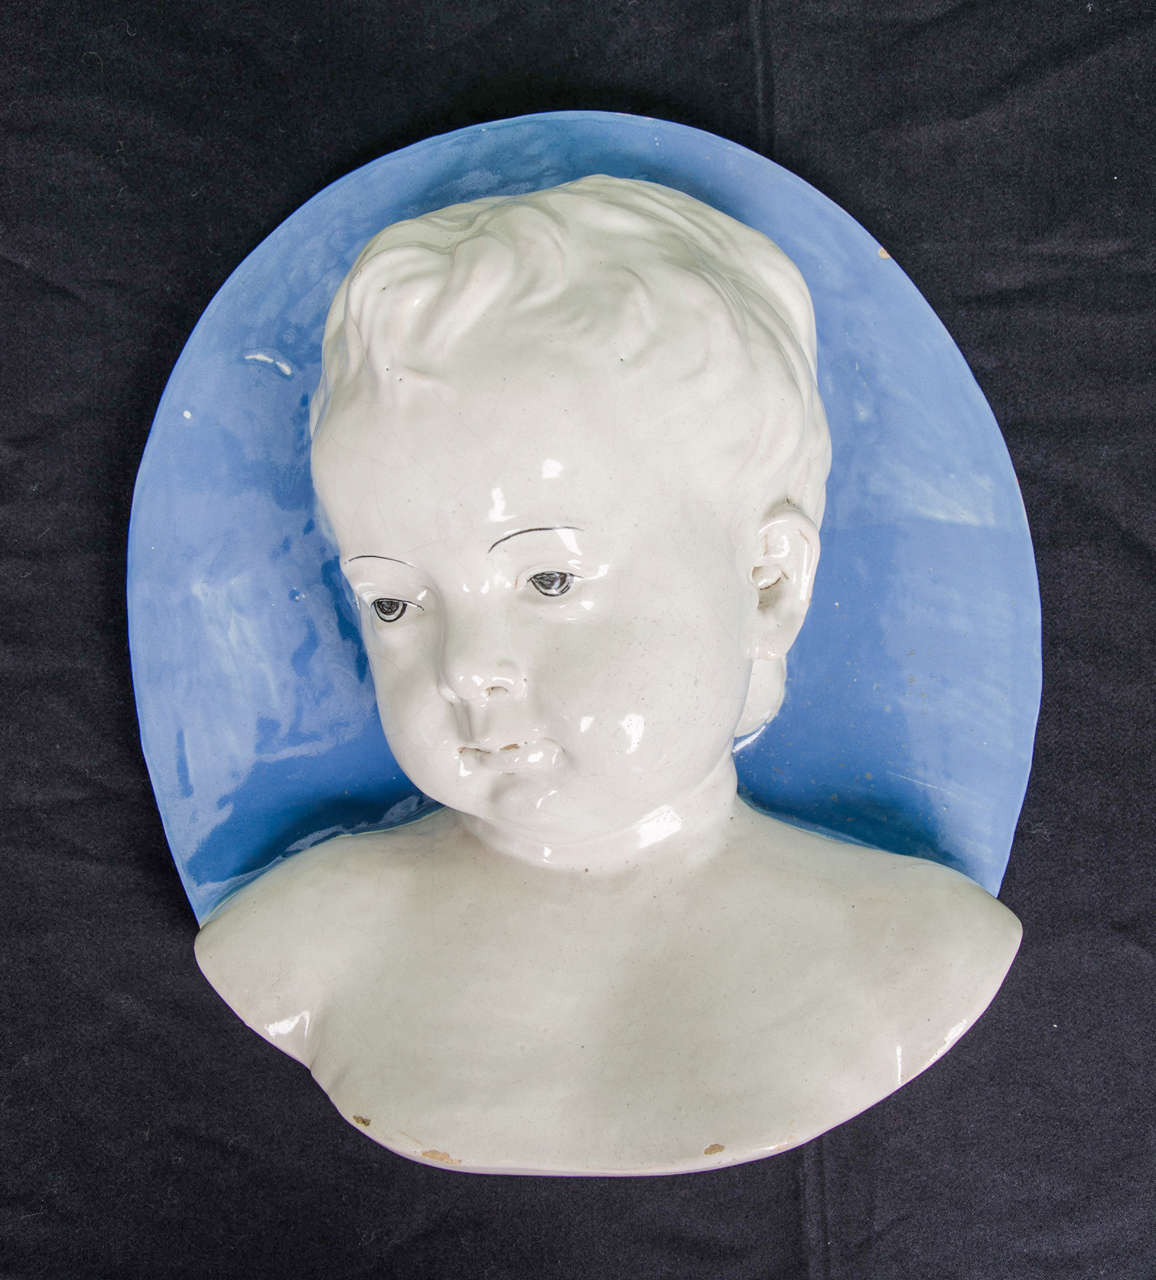 A beautiful round Plaque depicting the bust of a young boy in the 